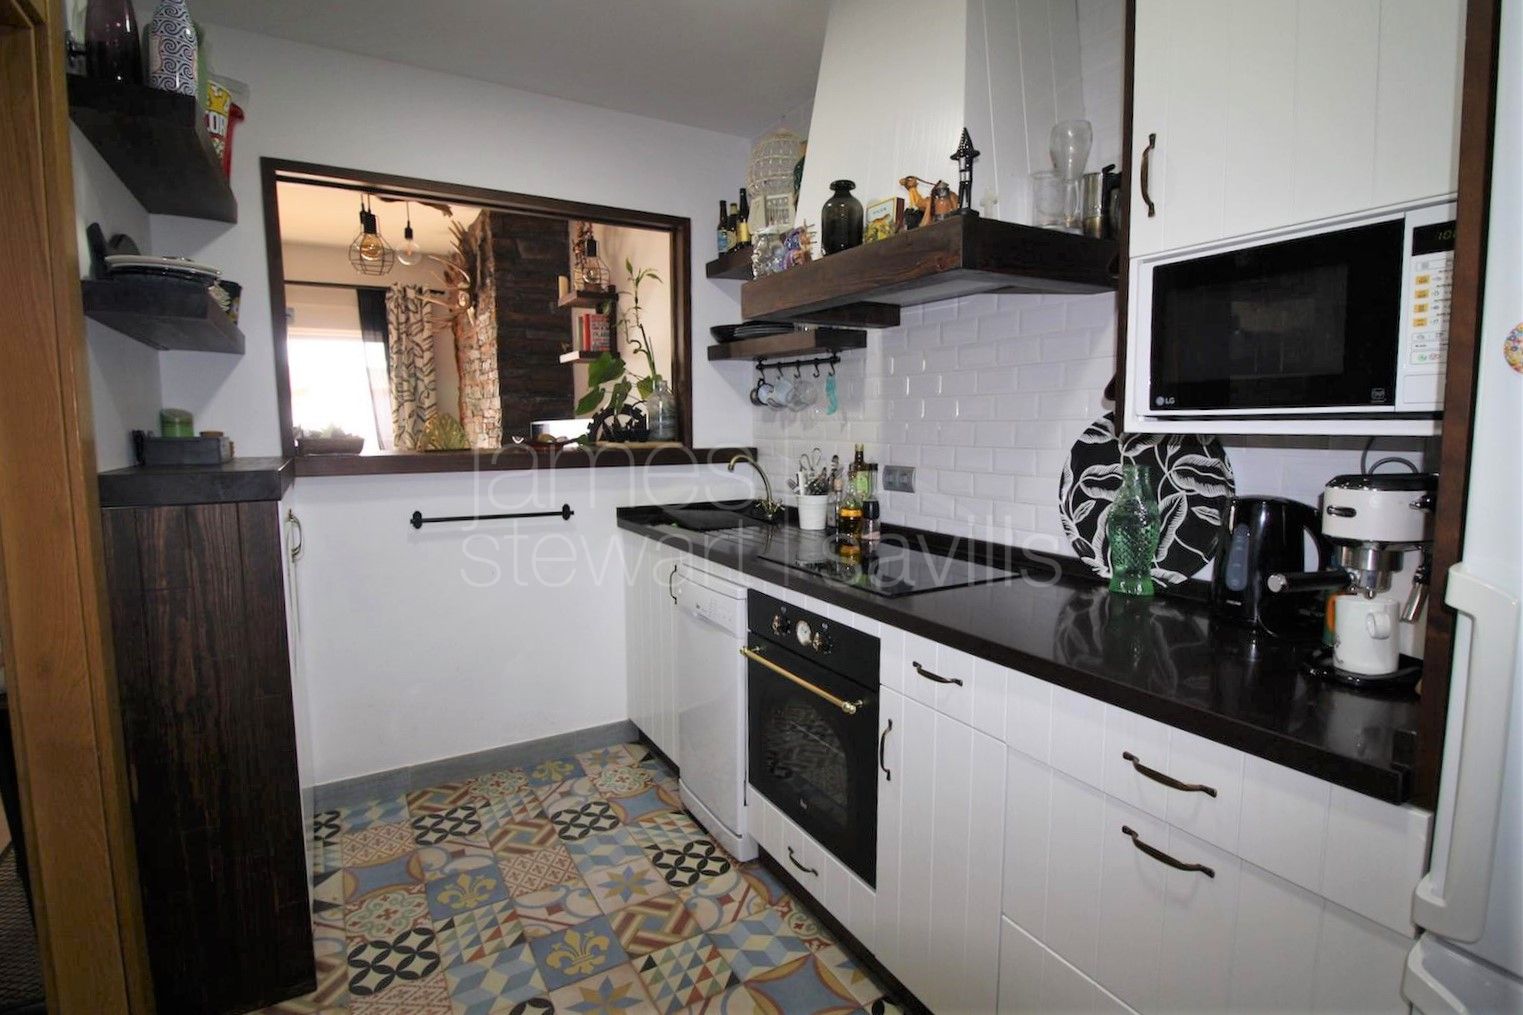 2 Bedroom apartment with closed terrace and private garden in Alcaidesa Costa